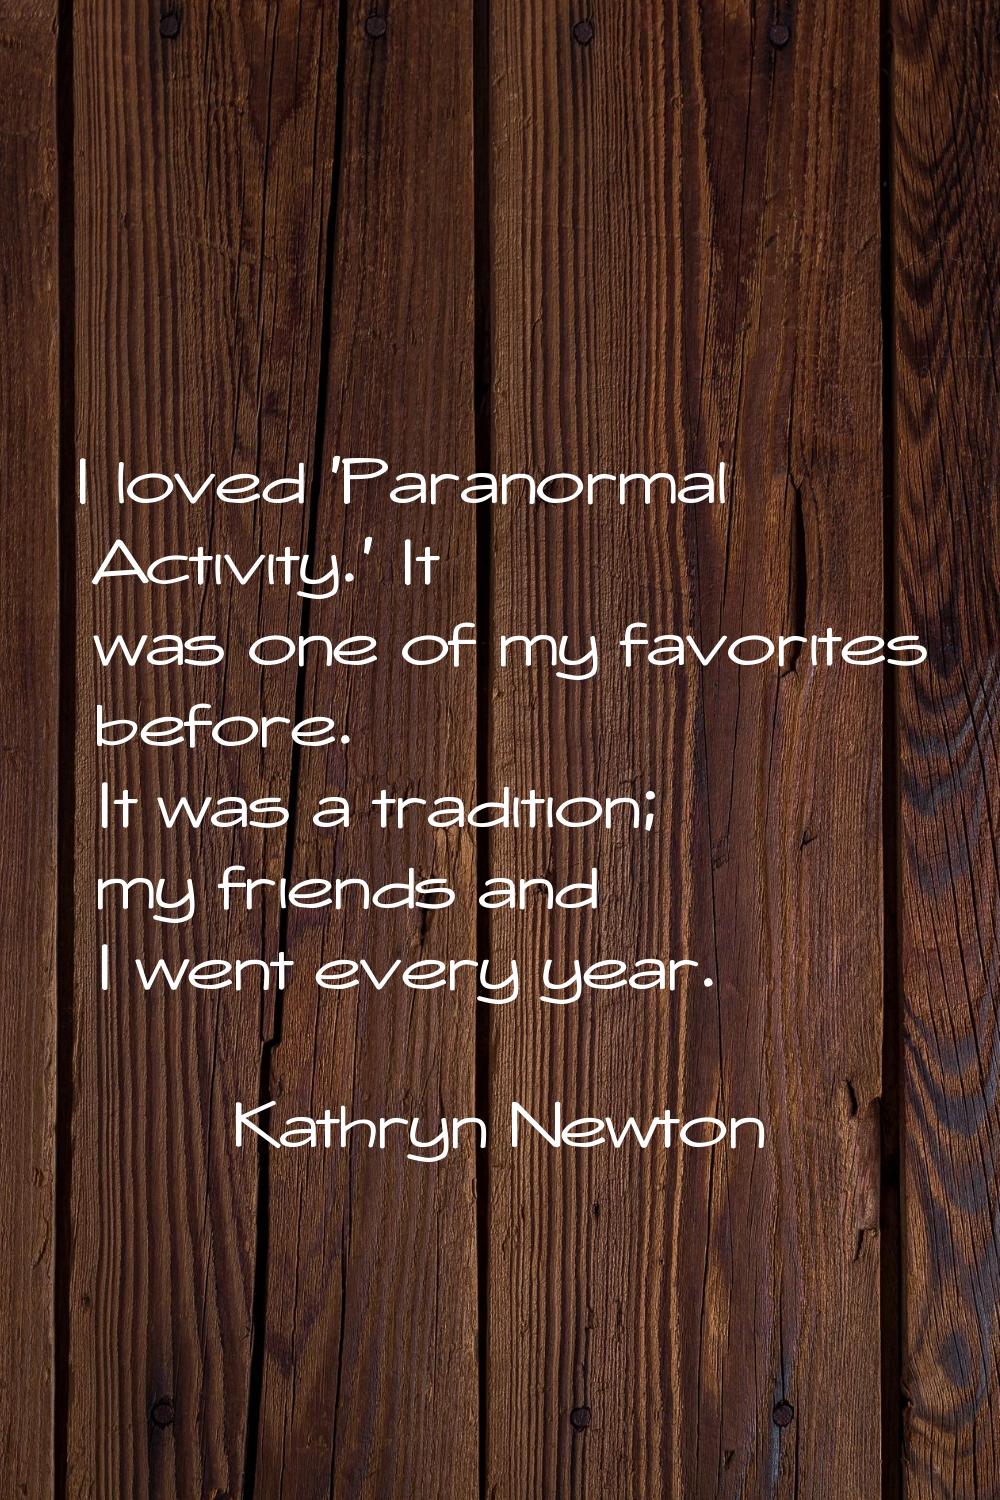 I loved 'Paranormal Activity.' It was one of my favorites before. It was a tradition; my friends an